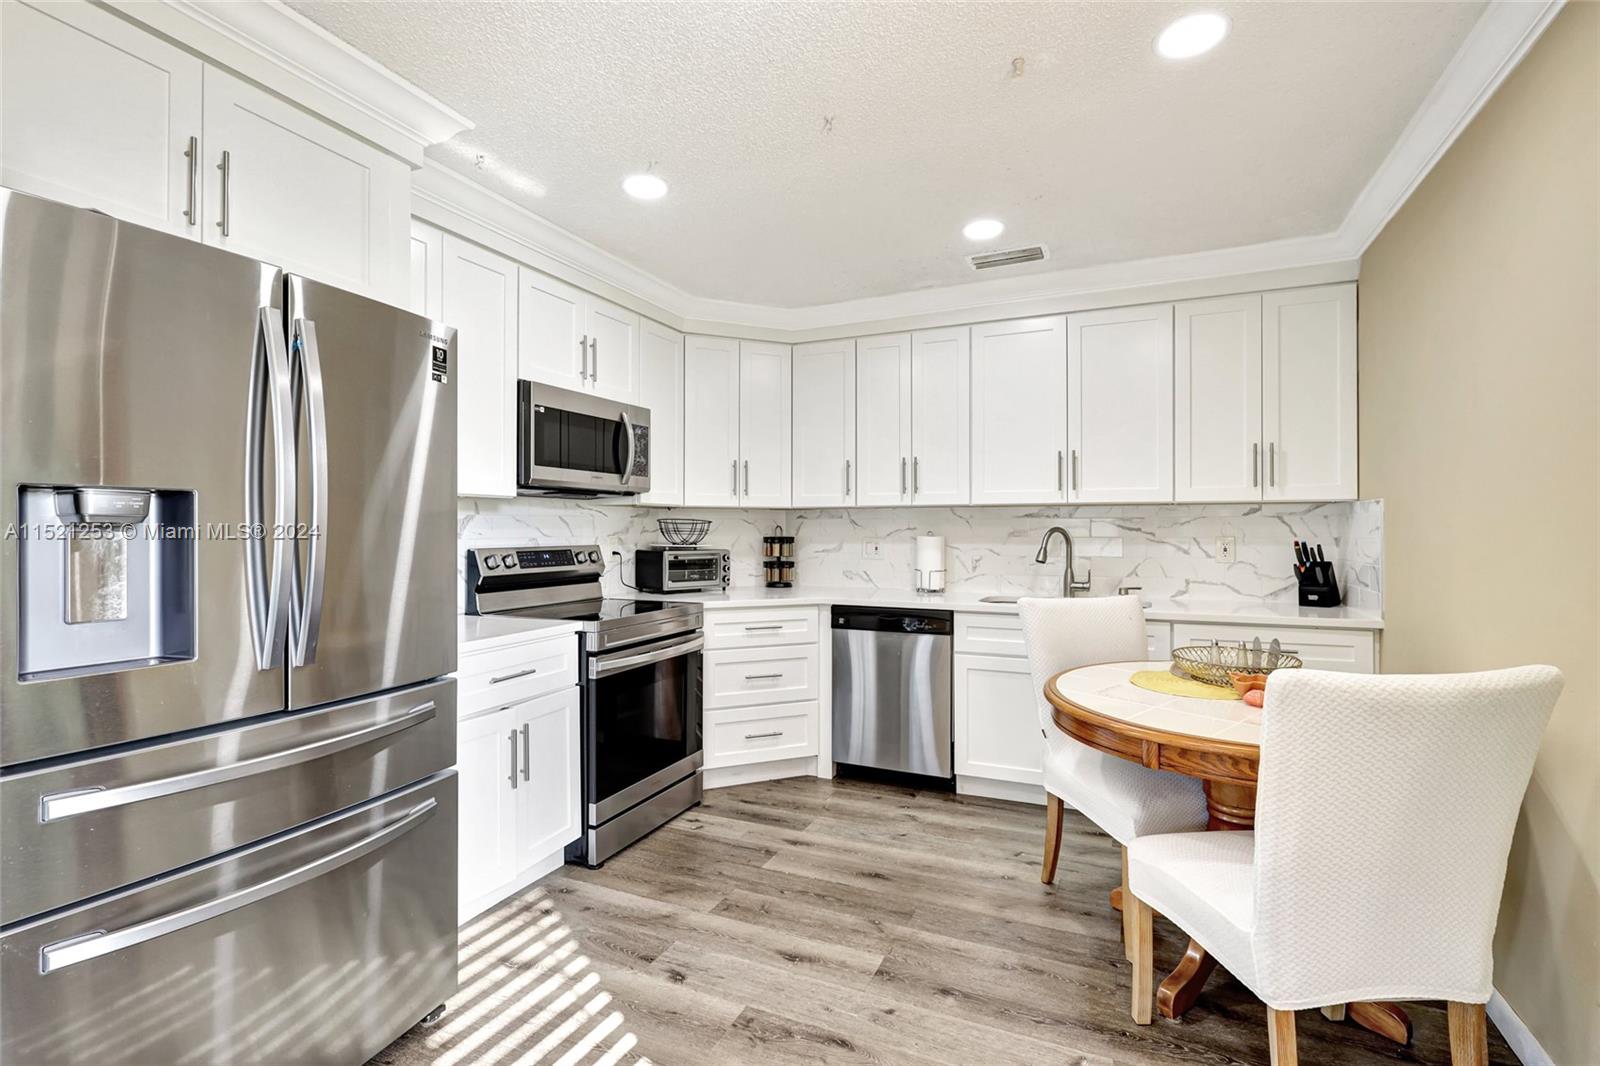 a kitchen with cabinets stainless steel appliances and wooden floor